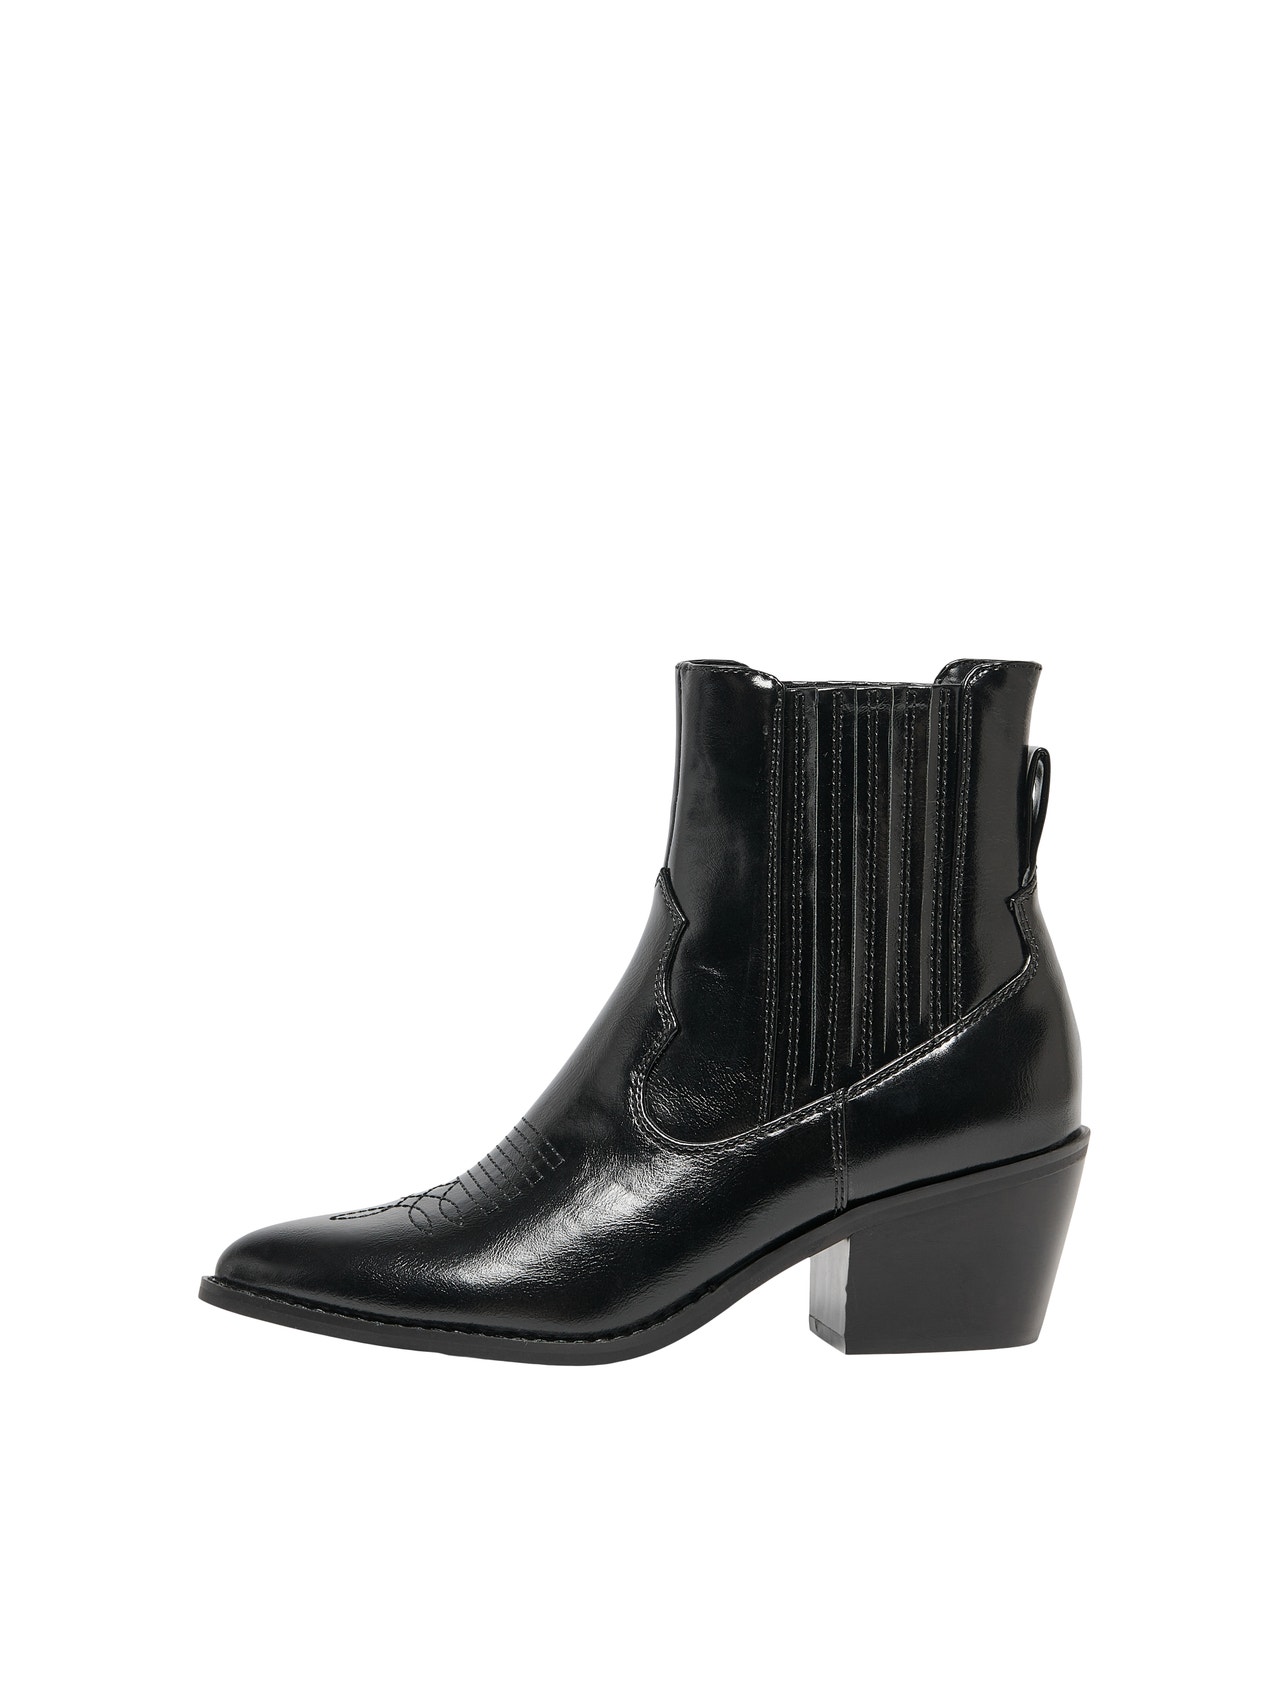 ONLY Boots -Black - 15271800